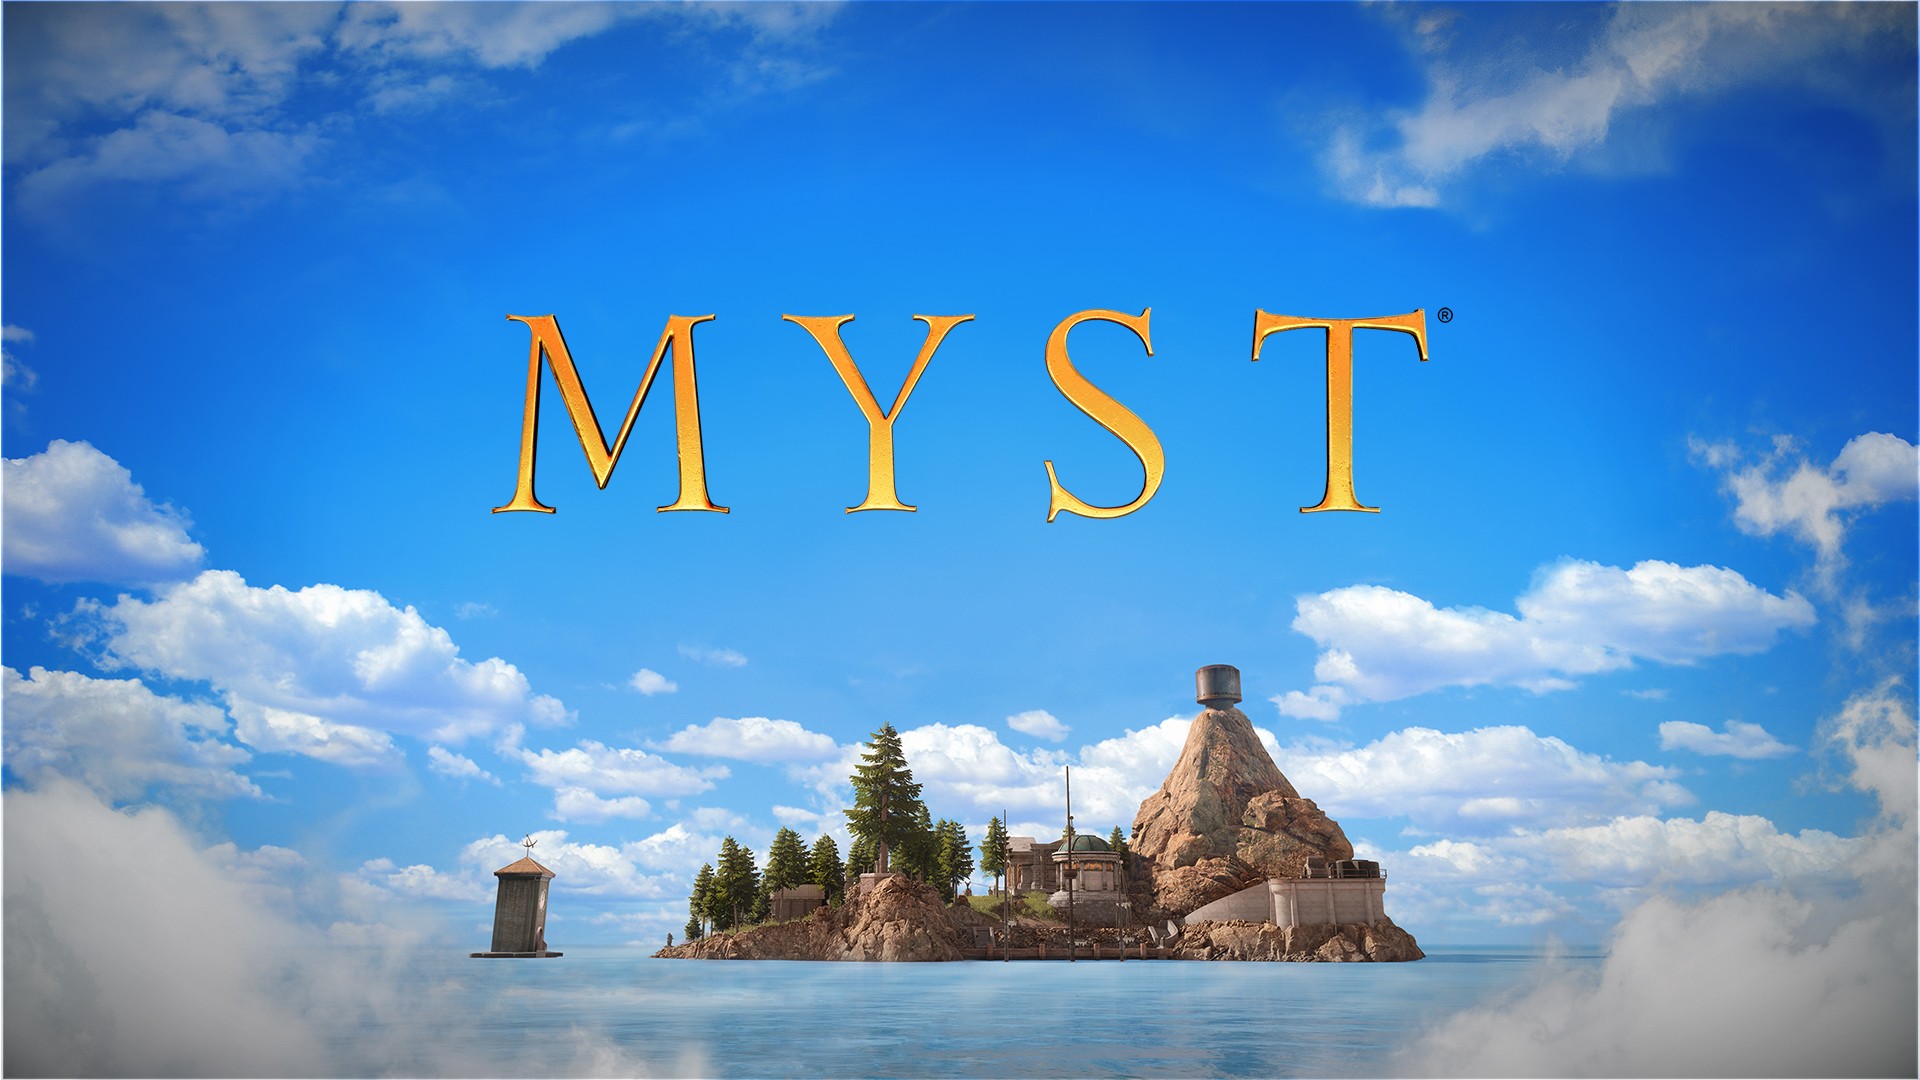 Let’s Play Myst